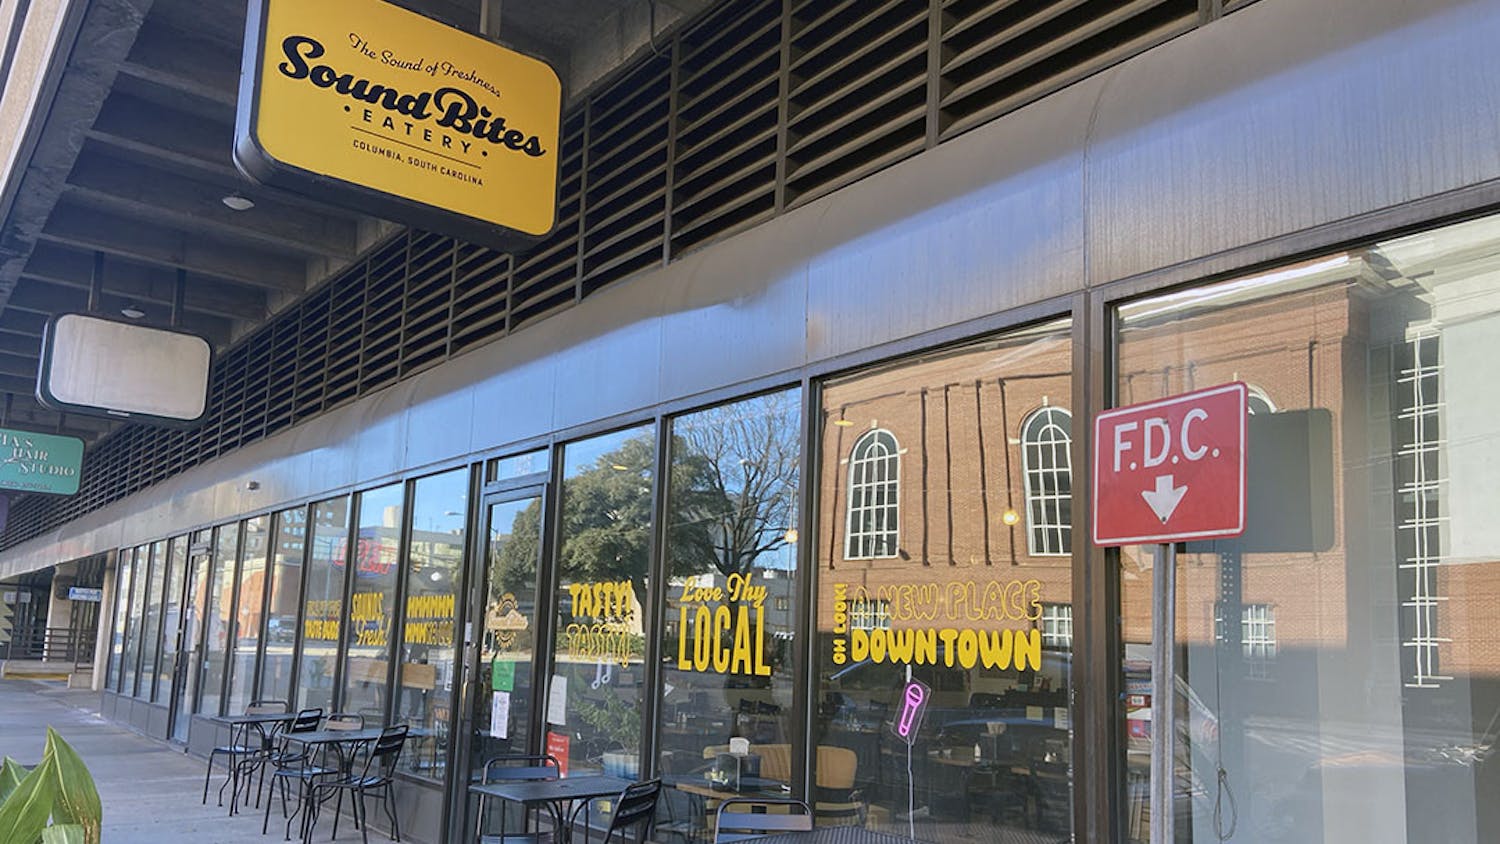 Sound Bites Eatery, located on Sumter Street, serves gourmet meals made with locally-grown ingredients. At a reasonable price, this healthy restaurant is great for college students.